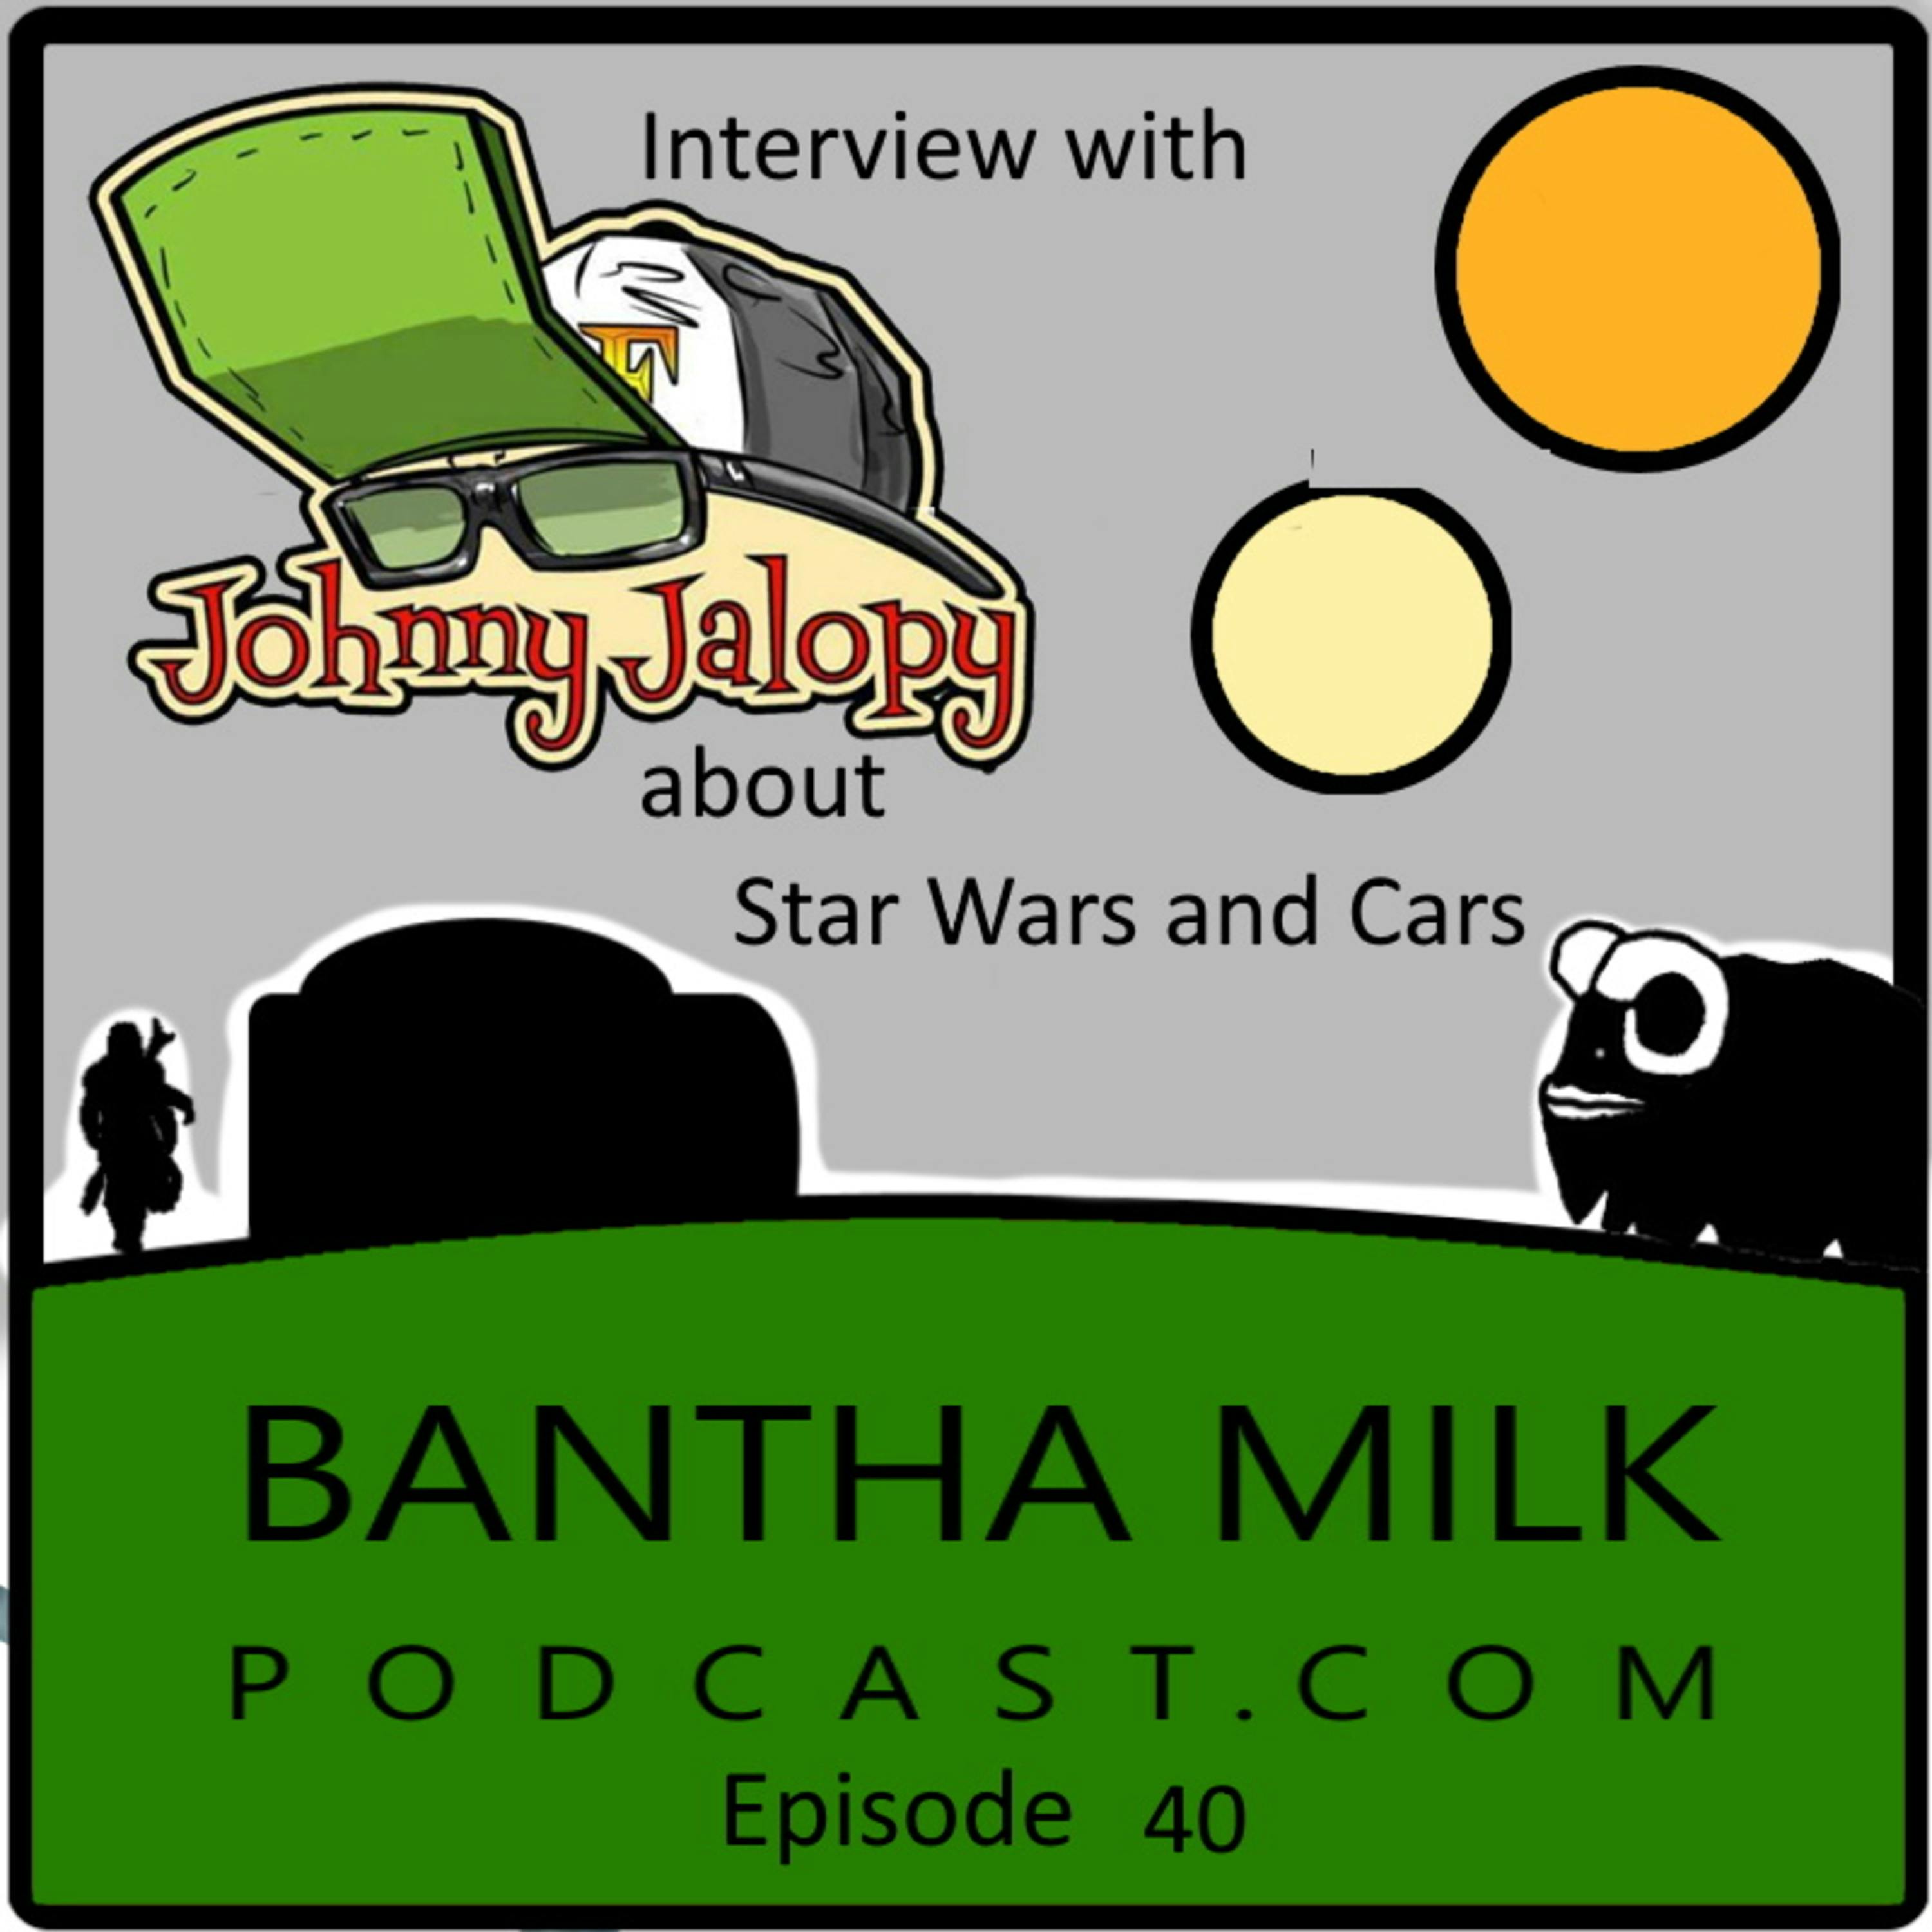 Johnny Jalopy tells us how Cars and Star Wars are awesome.